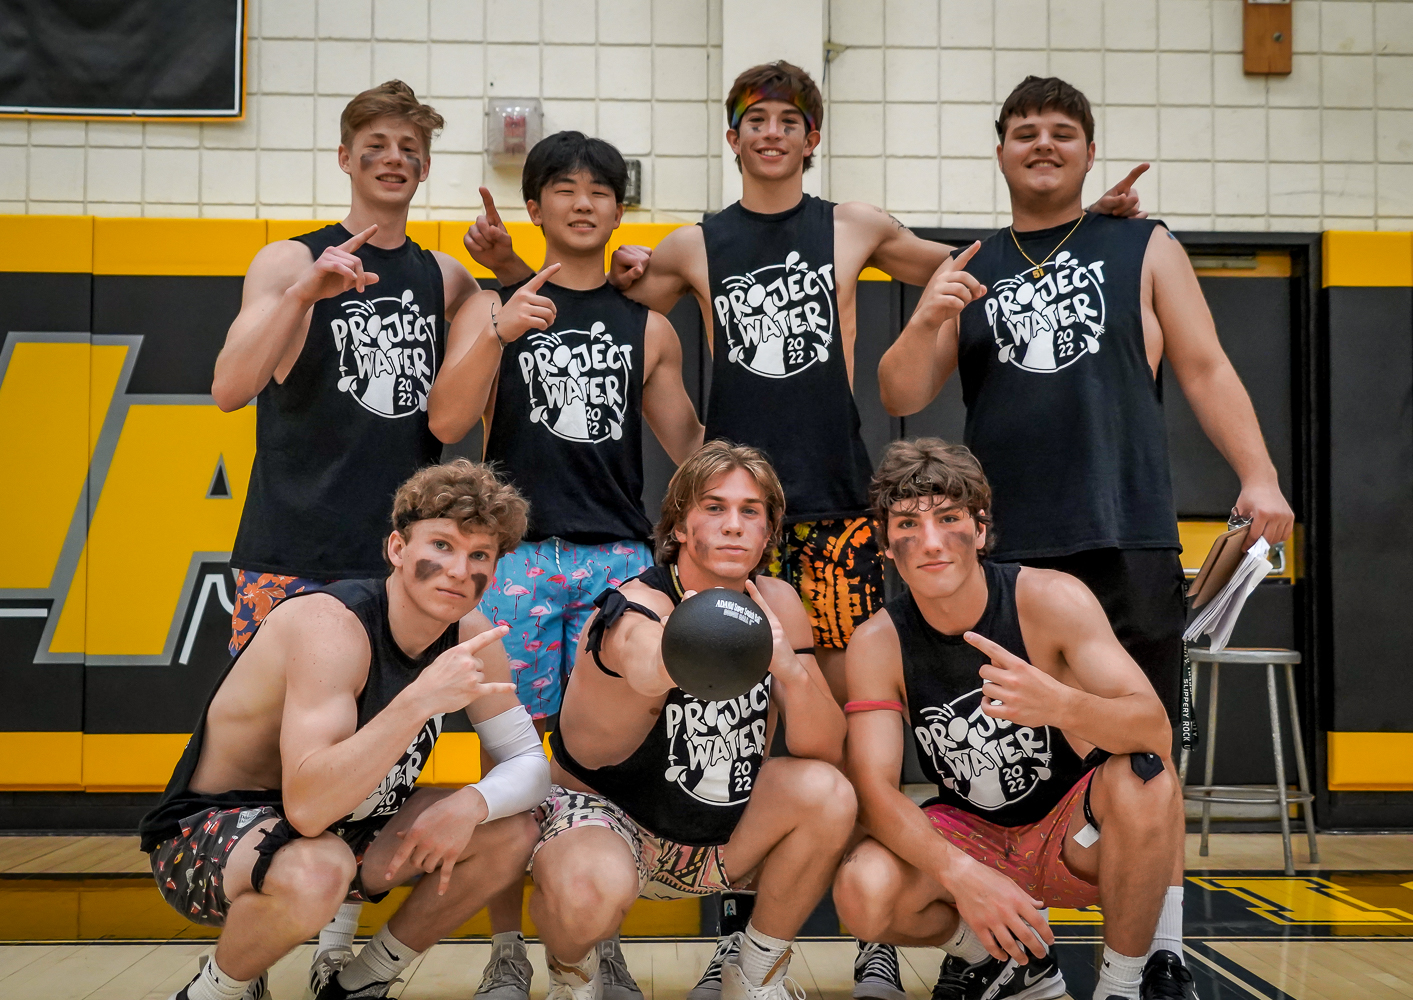 Winning Team: 5 Shades of White Top row left to right: Caleb Schall, Connor Chi, Cole Dorn, Nick Frisco Bottom row left to right: Shane ONeill, Ryan Treser, Nolan Colinear